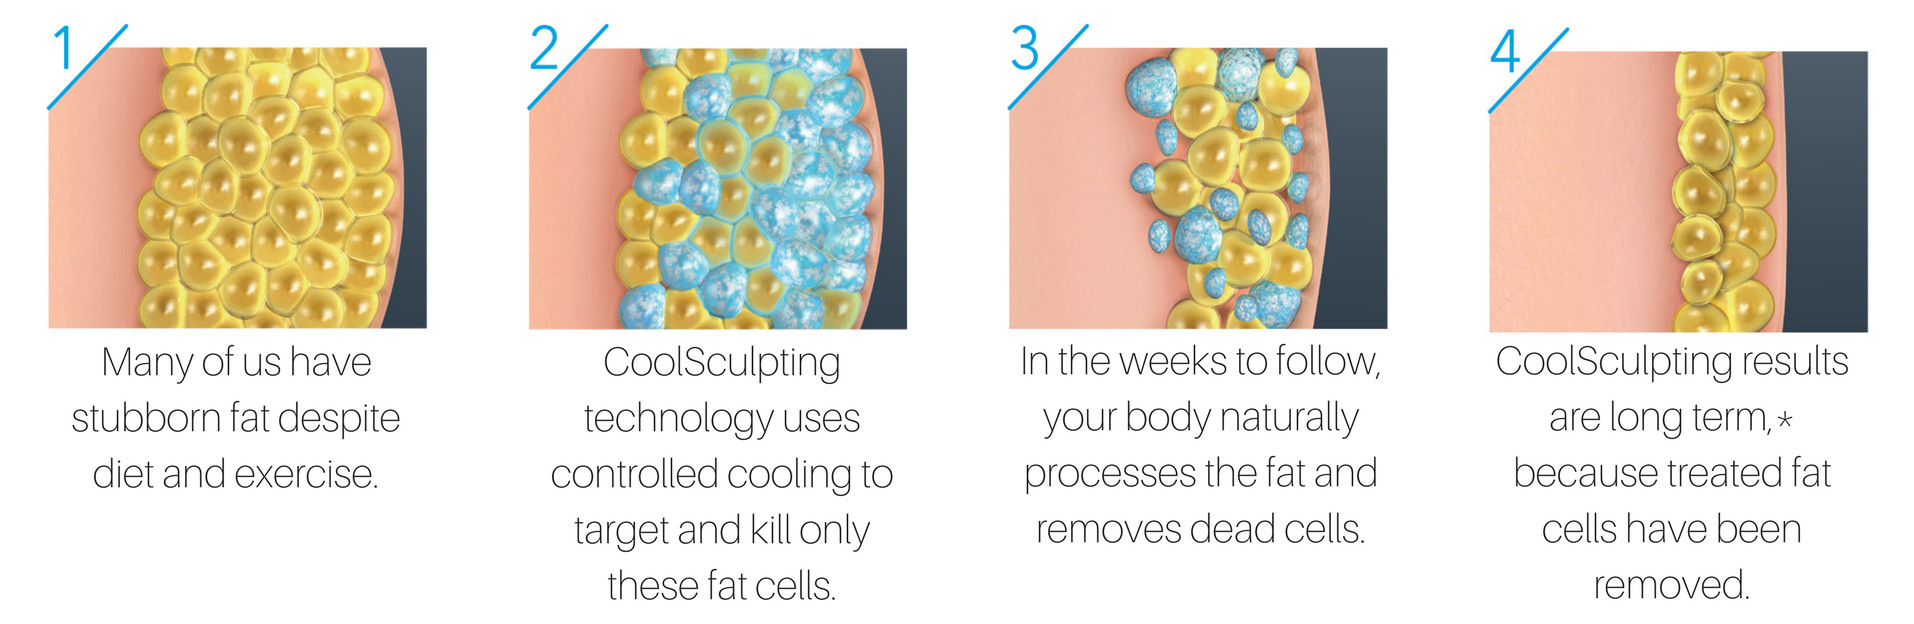 how coolsculpting works on our body fat